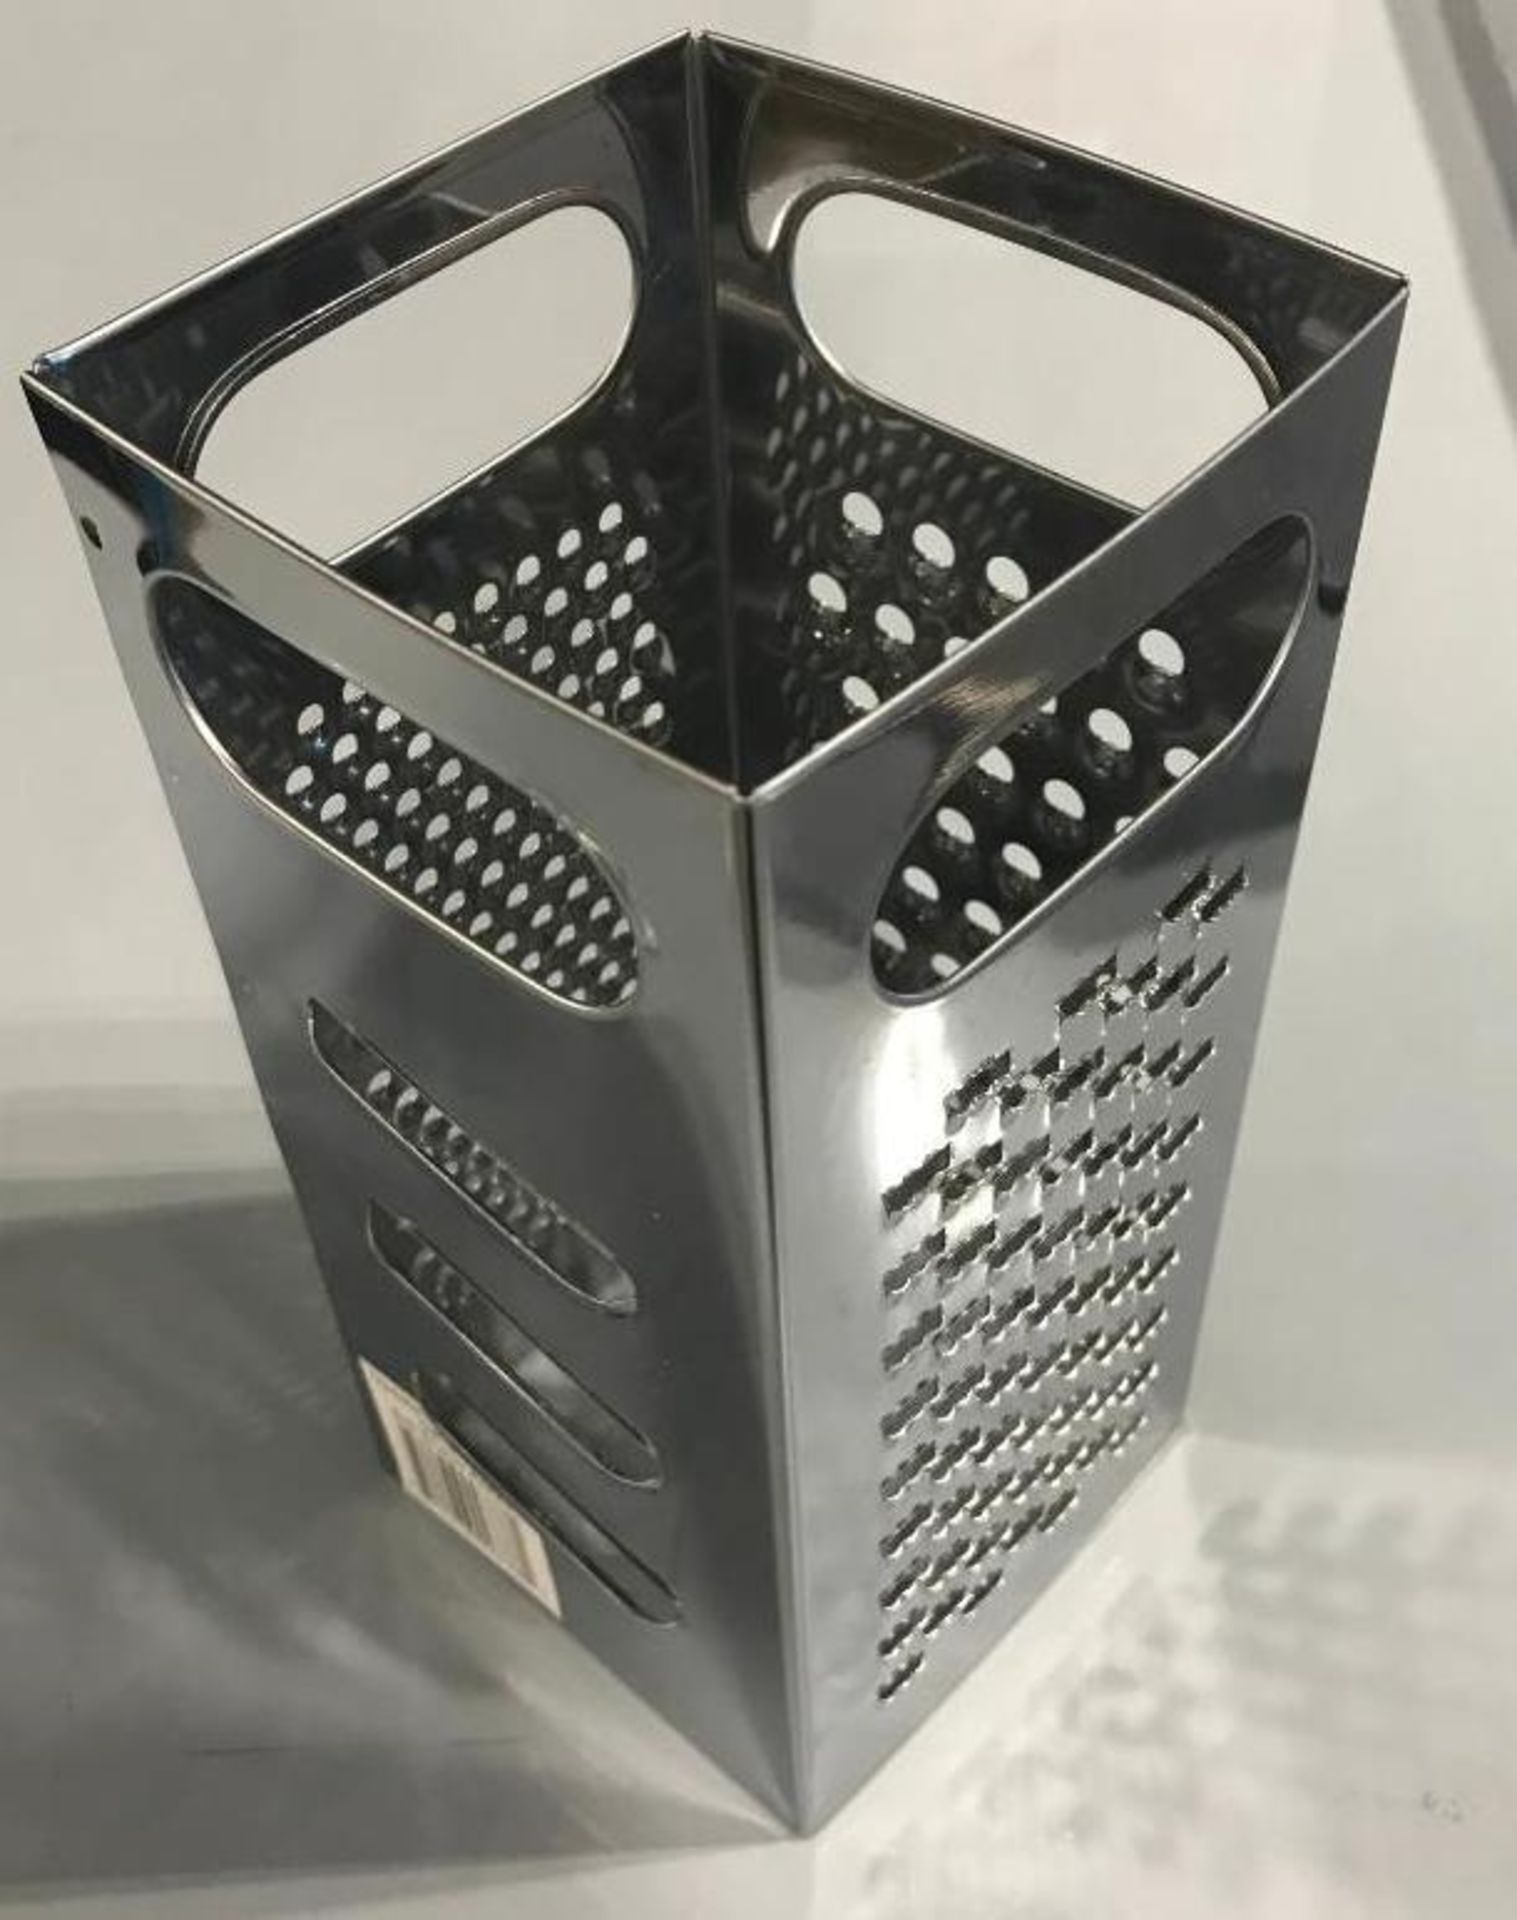 UPDATE INTERNATIONAL FOUR SIDED STAINLESS GRATER, GR-449 - NEW - Image 2 of 4